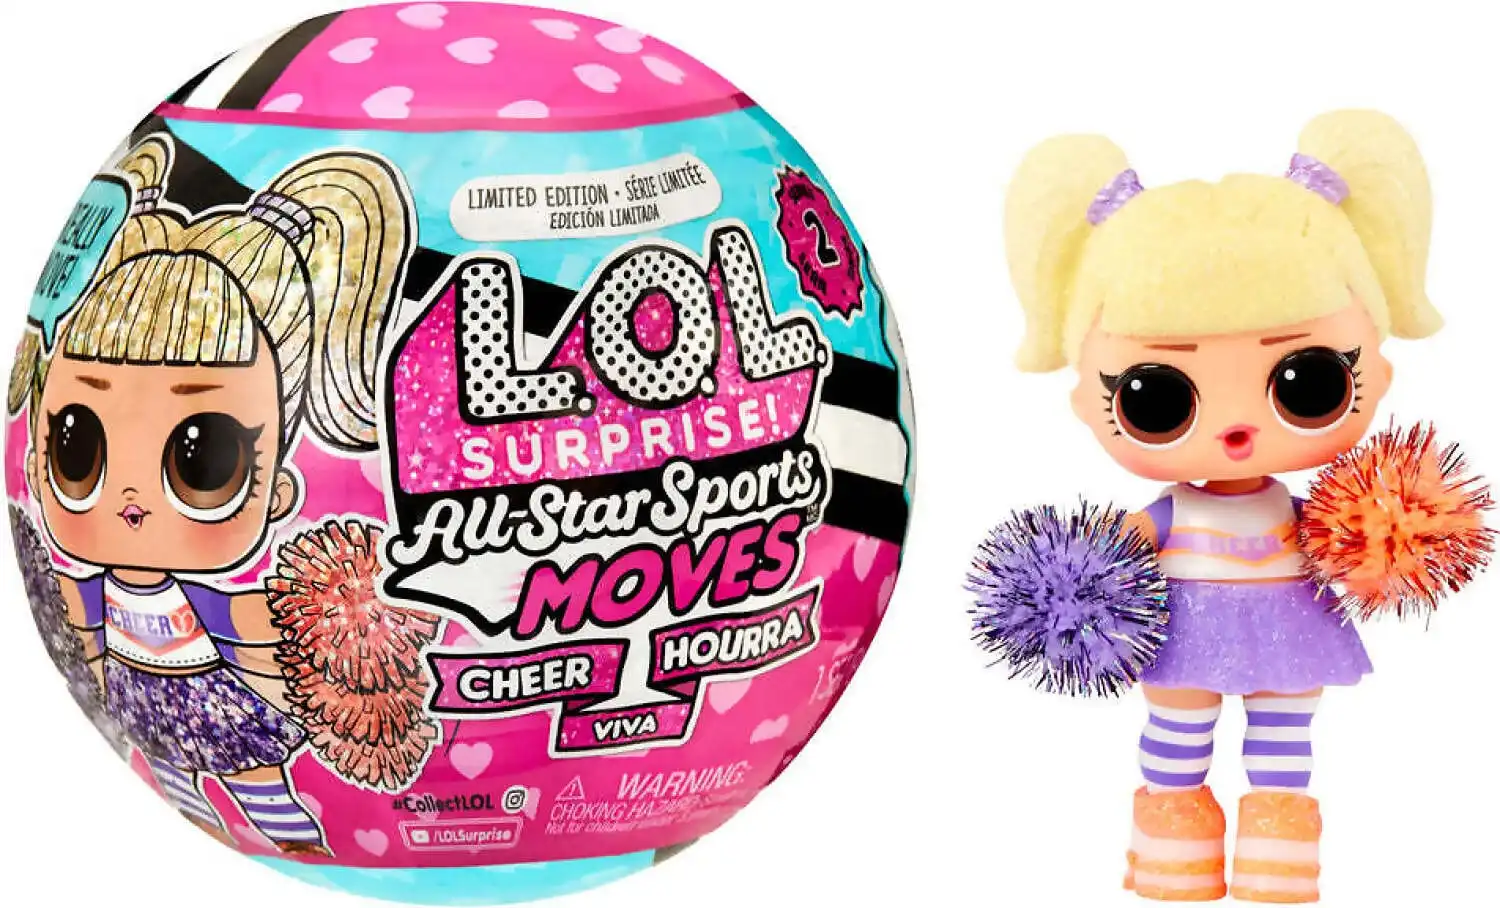 L.o.l Surprise - All Star Sports Moves - Cheer Series 2 Dolls